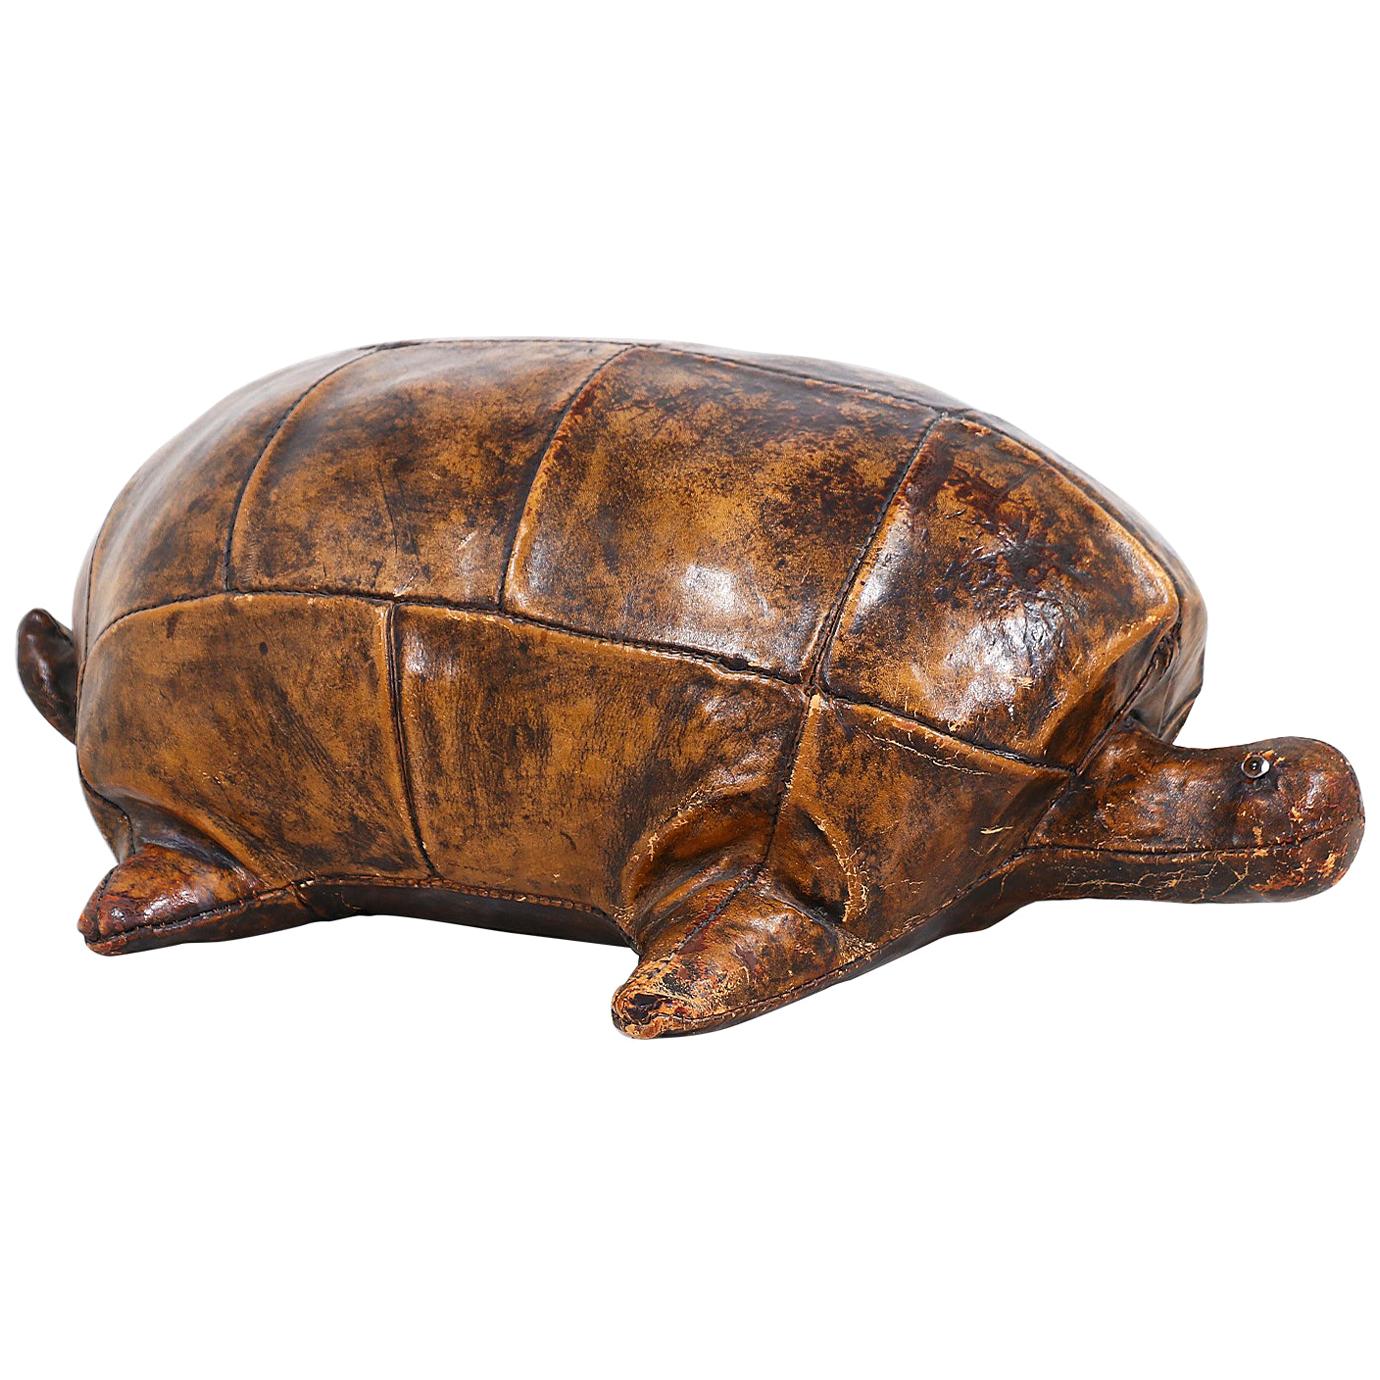 Dimitri Omersa Leather Turtle for Abercrombie and Fitch